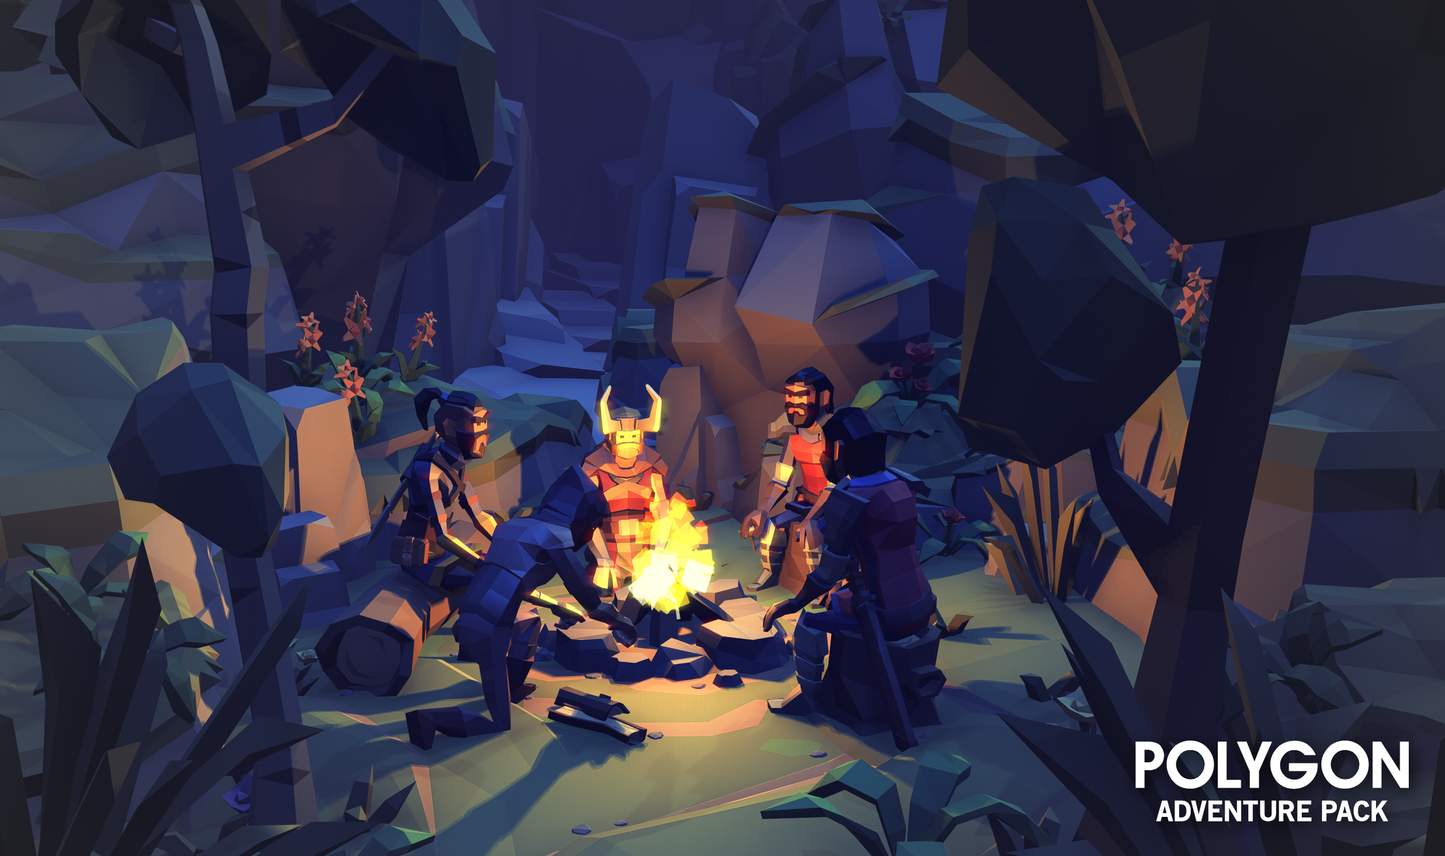 A group of adventurers in low poly 3D sitting around a campfire